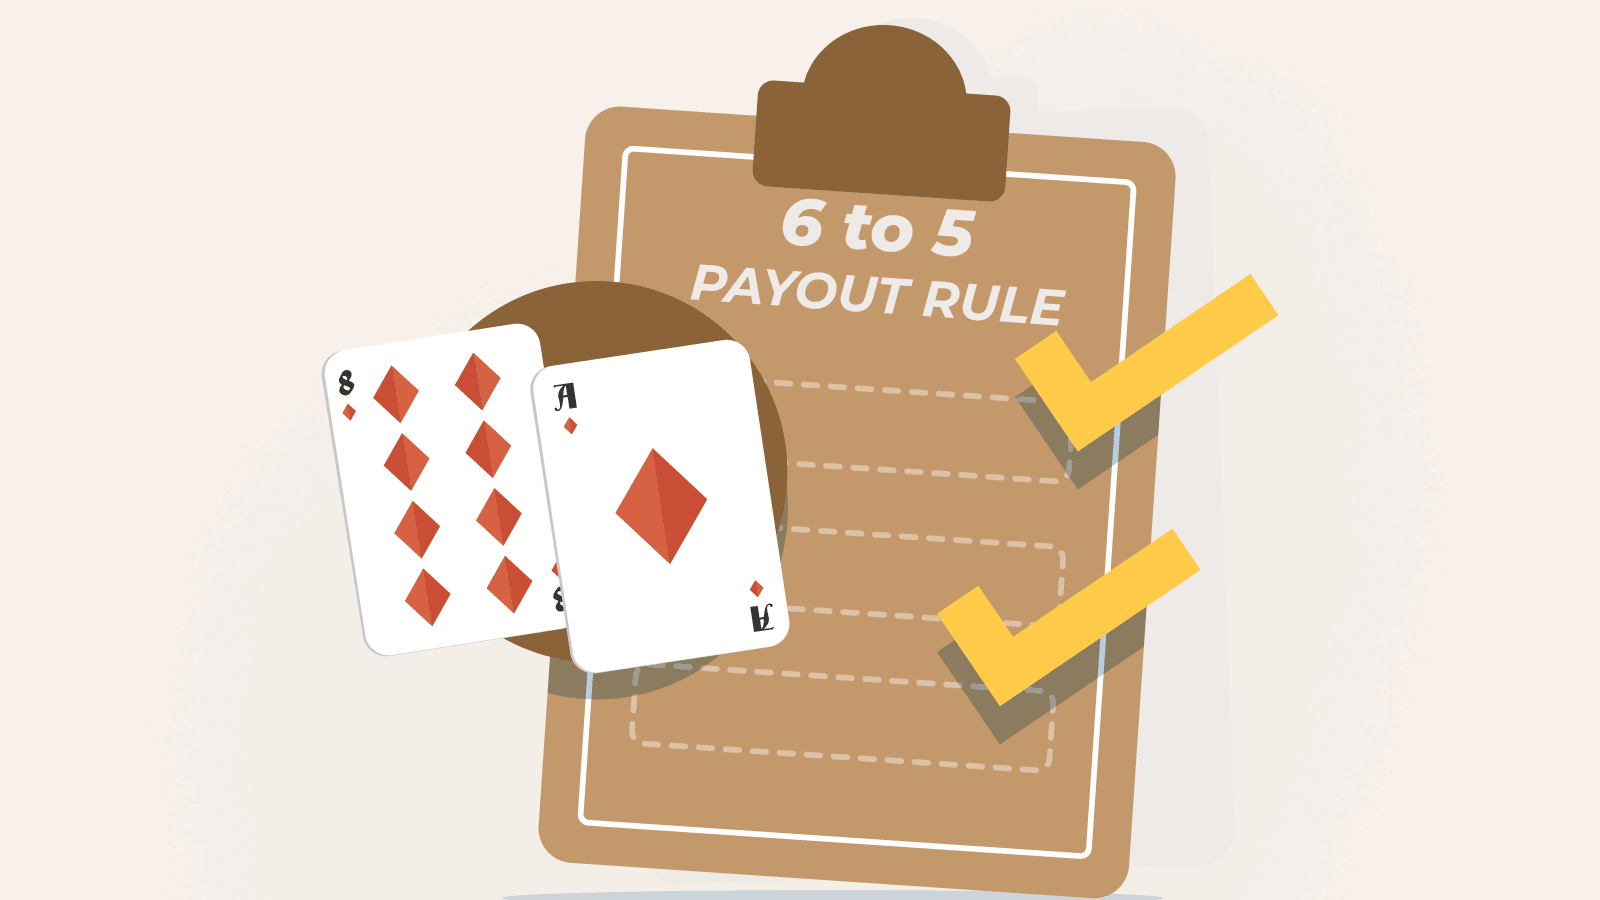 6 to 5 Payout Rule